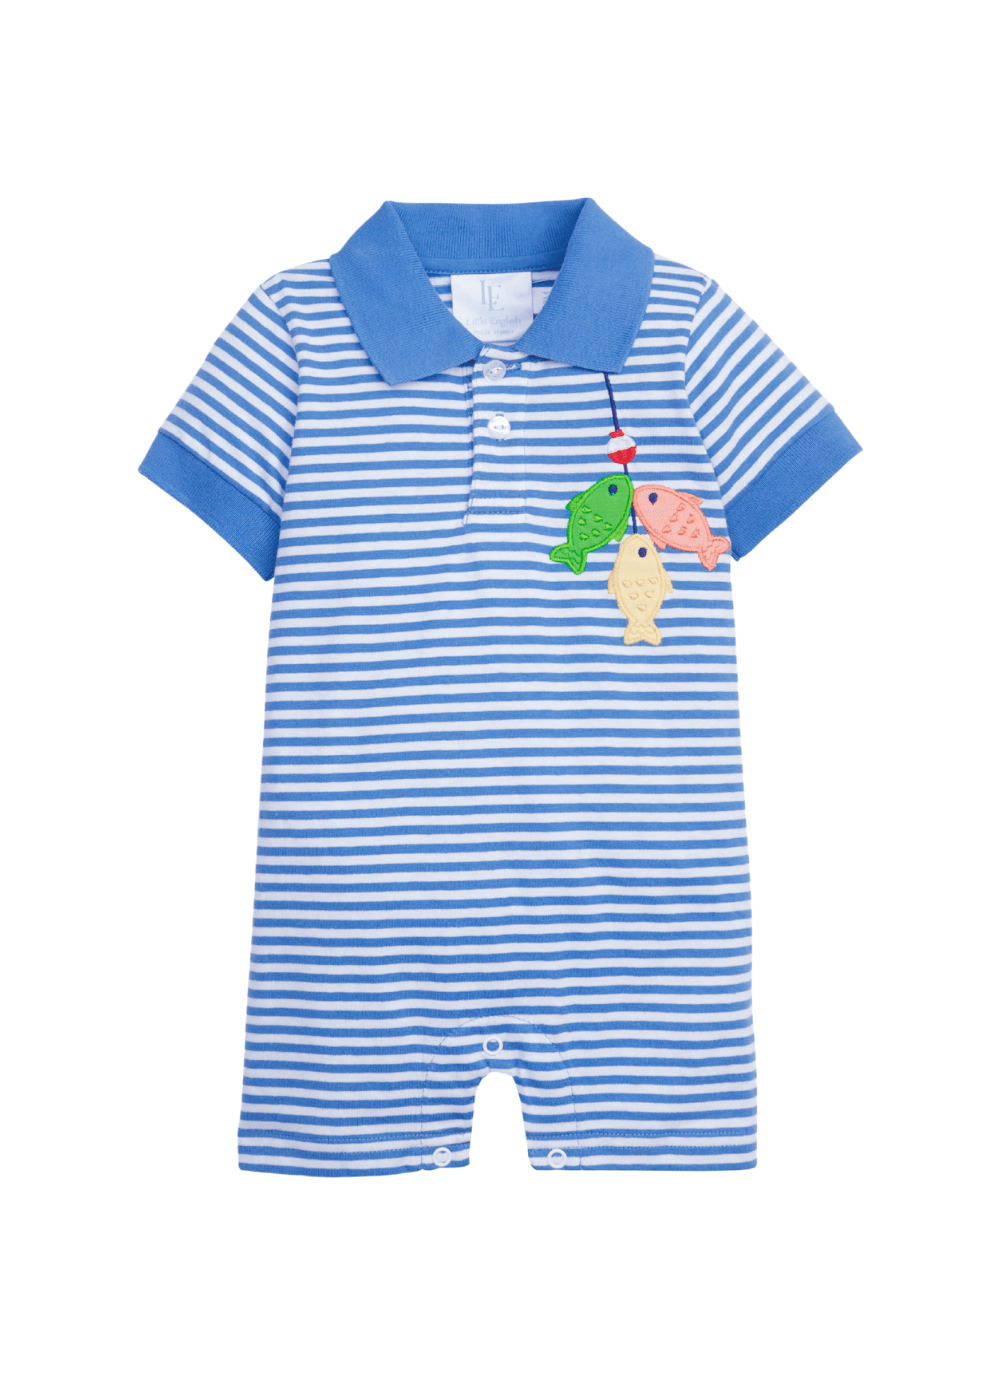 classic childrens clothing boys blue and white striped polo romper with applique fish